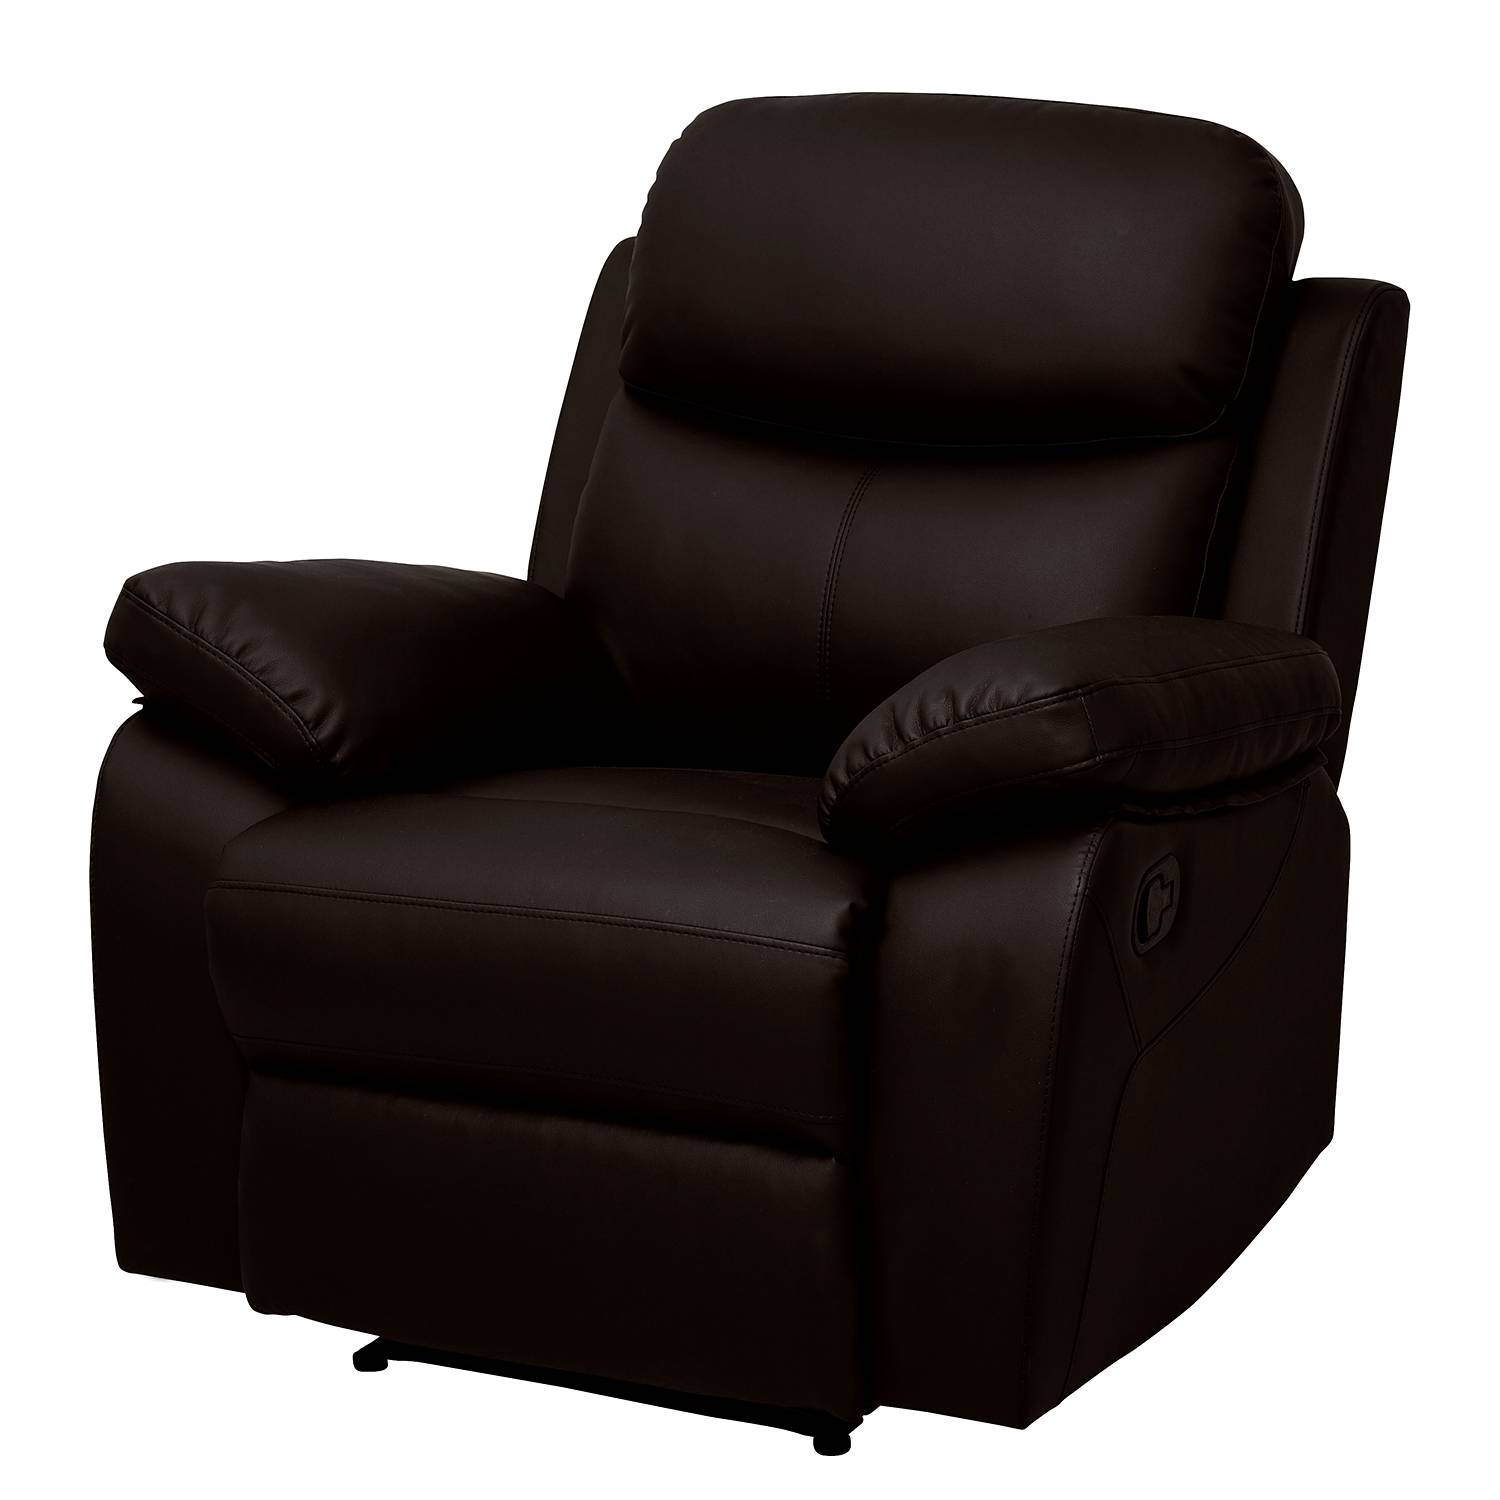 Home24 Relaxfauteuil Tetchill, Modoform